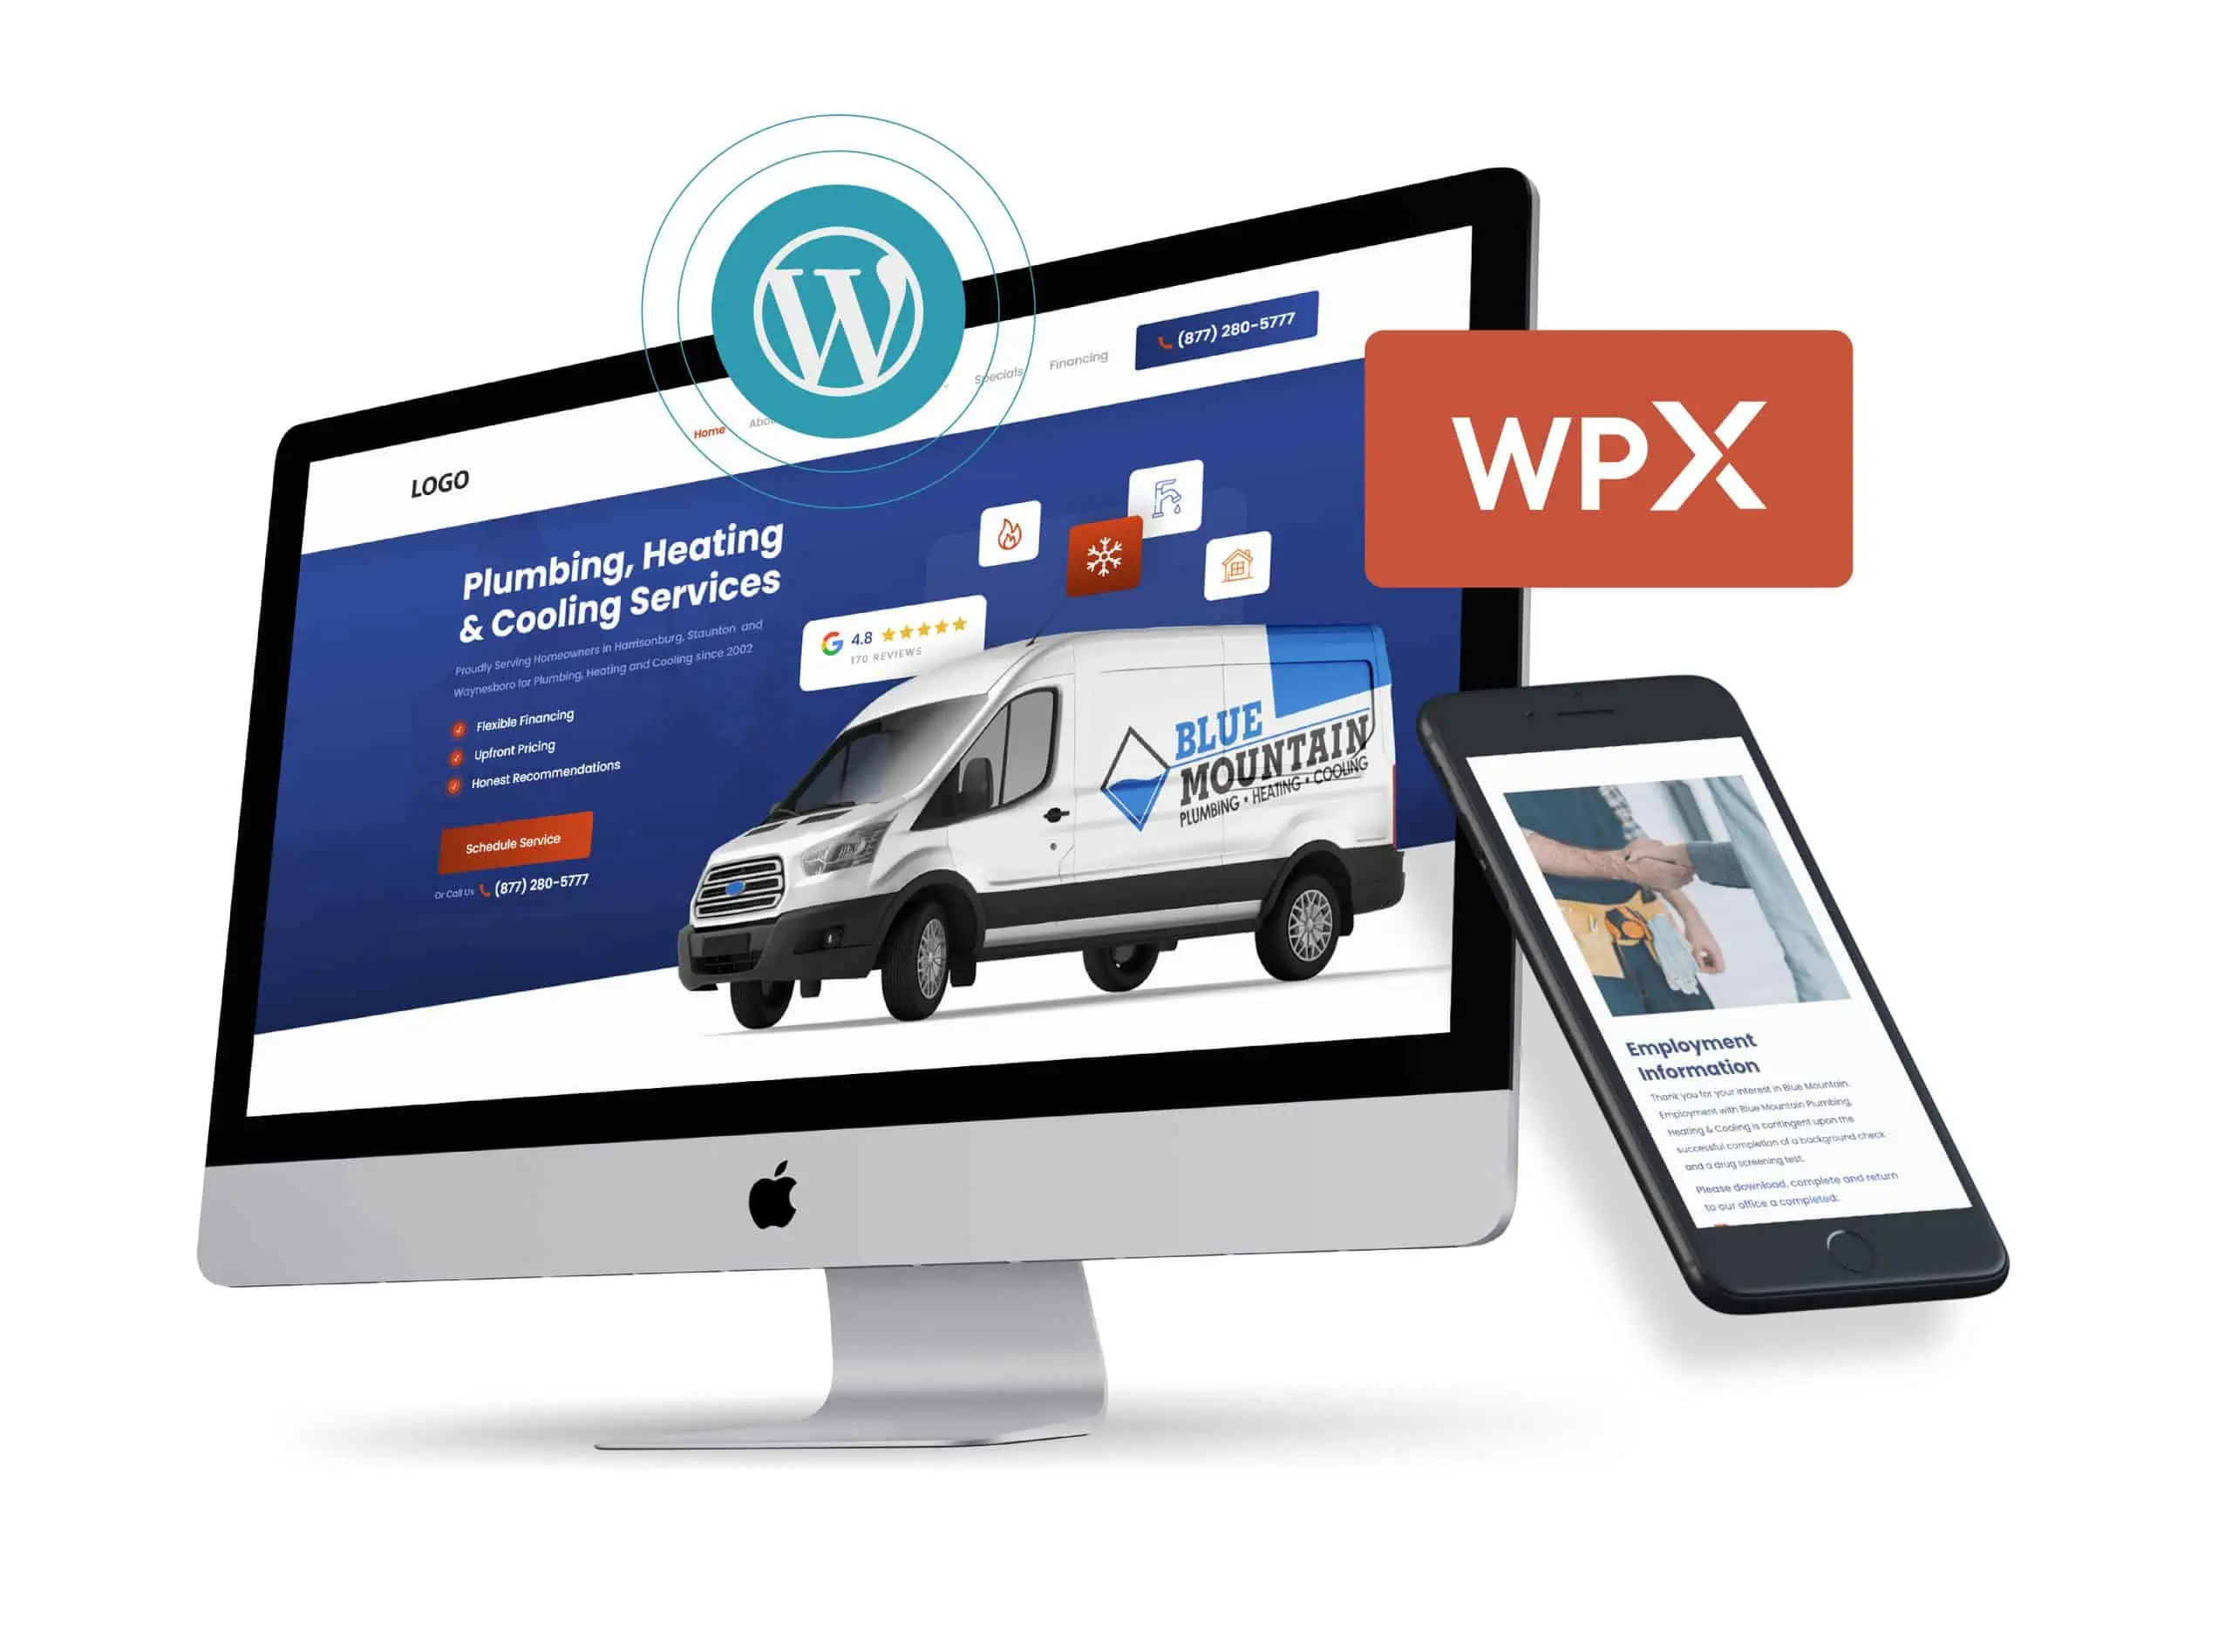 Converting From Magento To Wordpress | WPXStudios